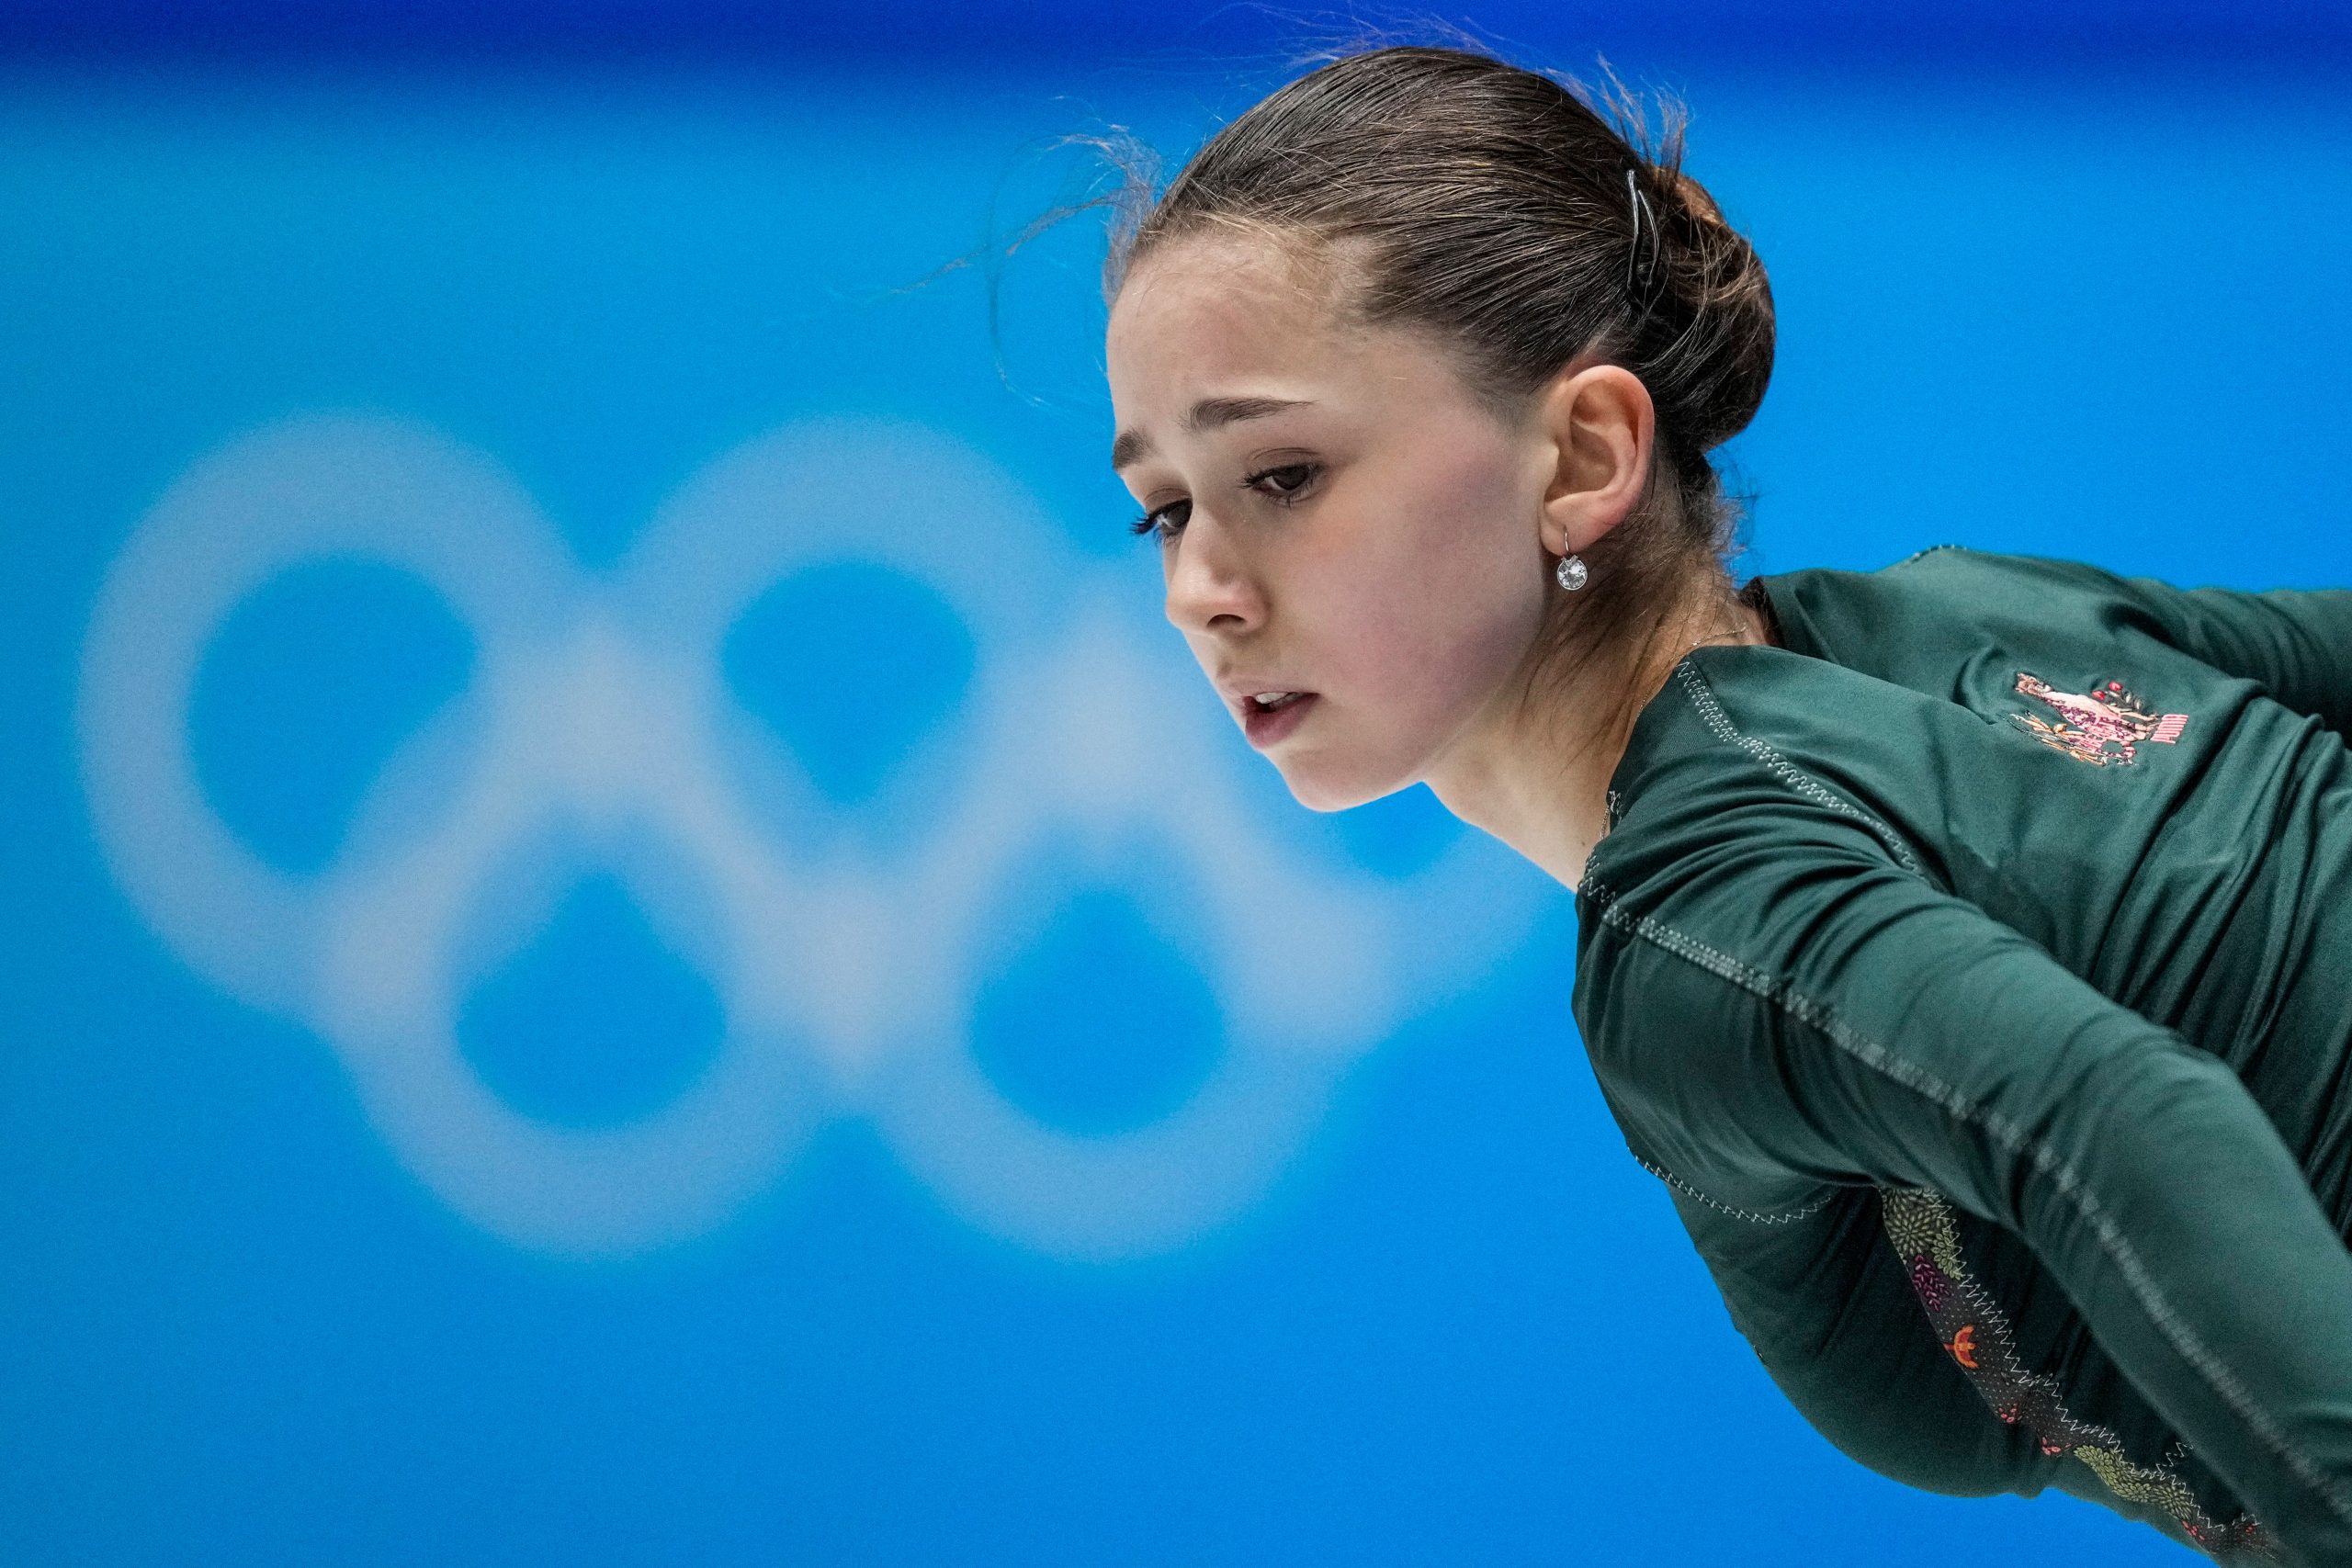 IOC official quashes calls for total Russia ban in face of Kamila Valieva case